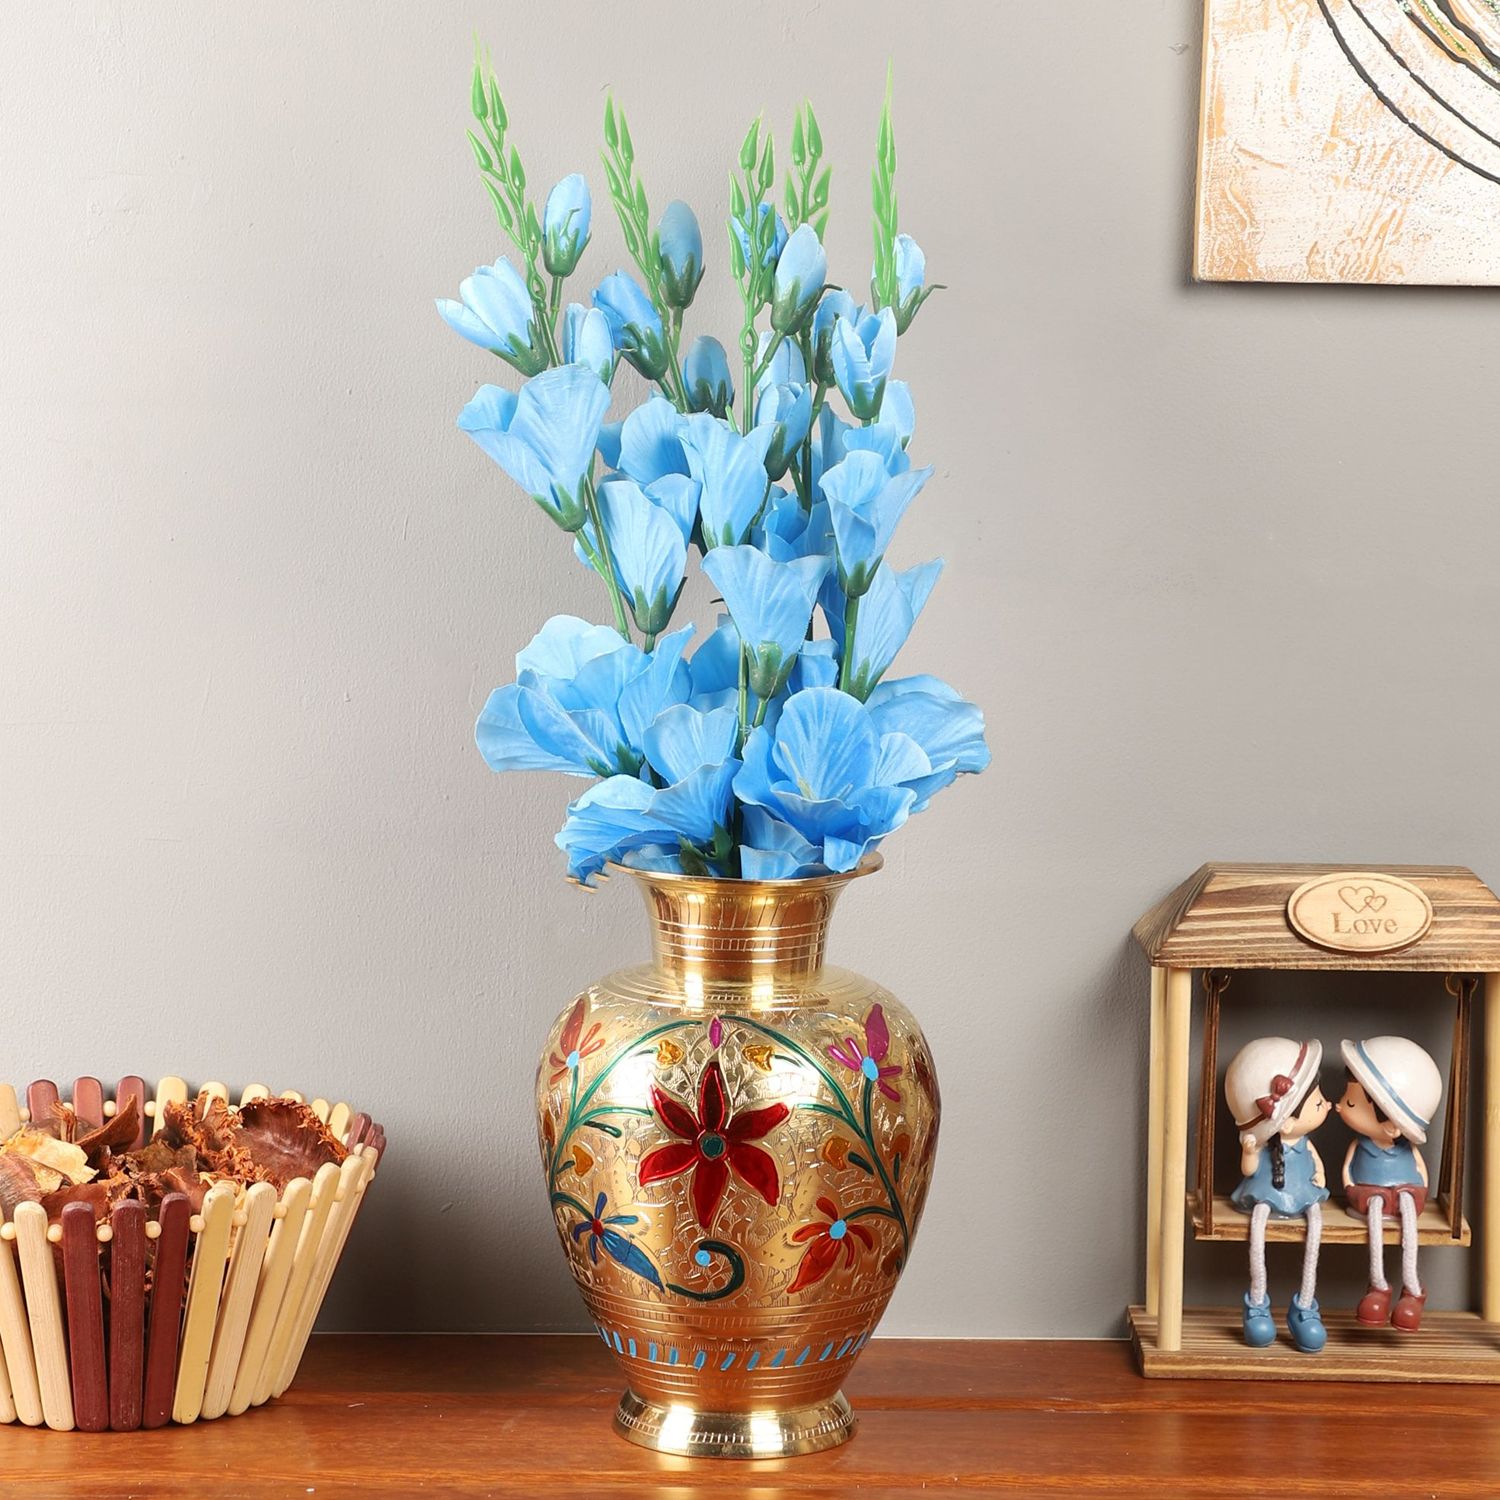 Tips and Tricks to Decorate Your Flower Vases at Home!